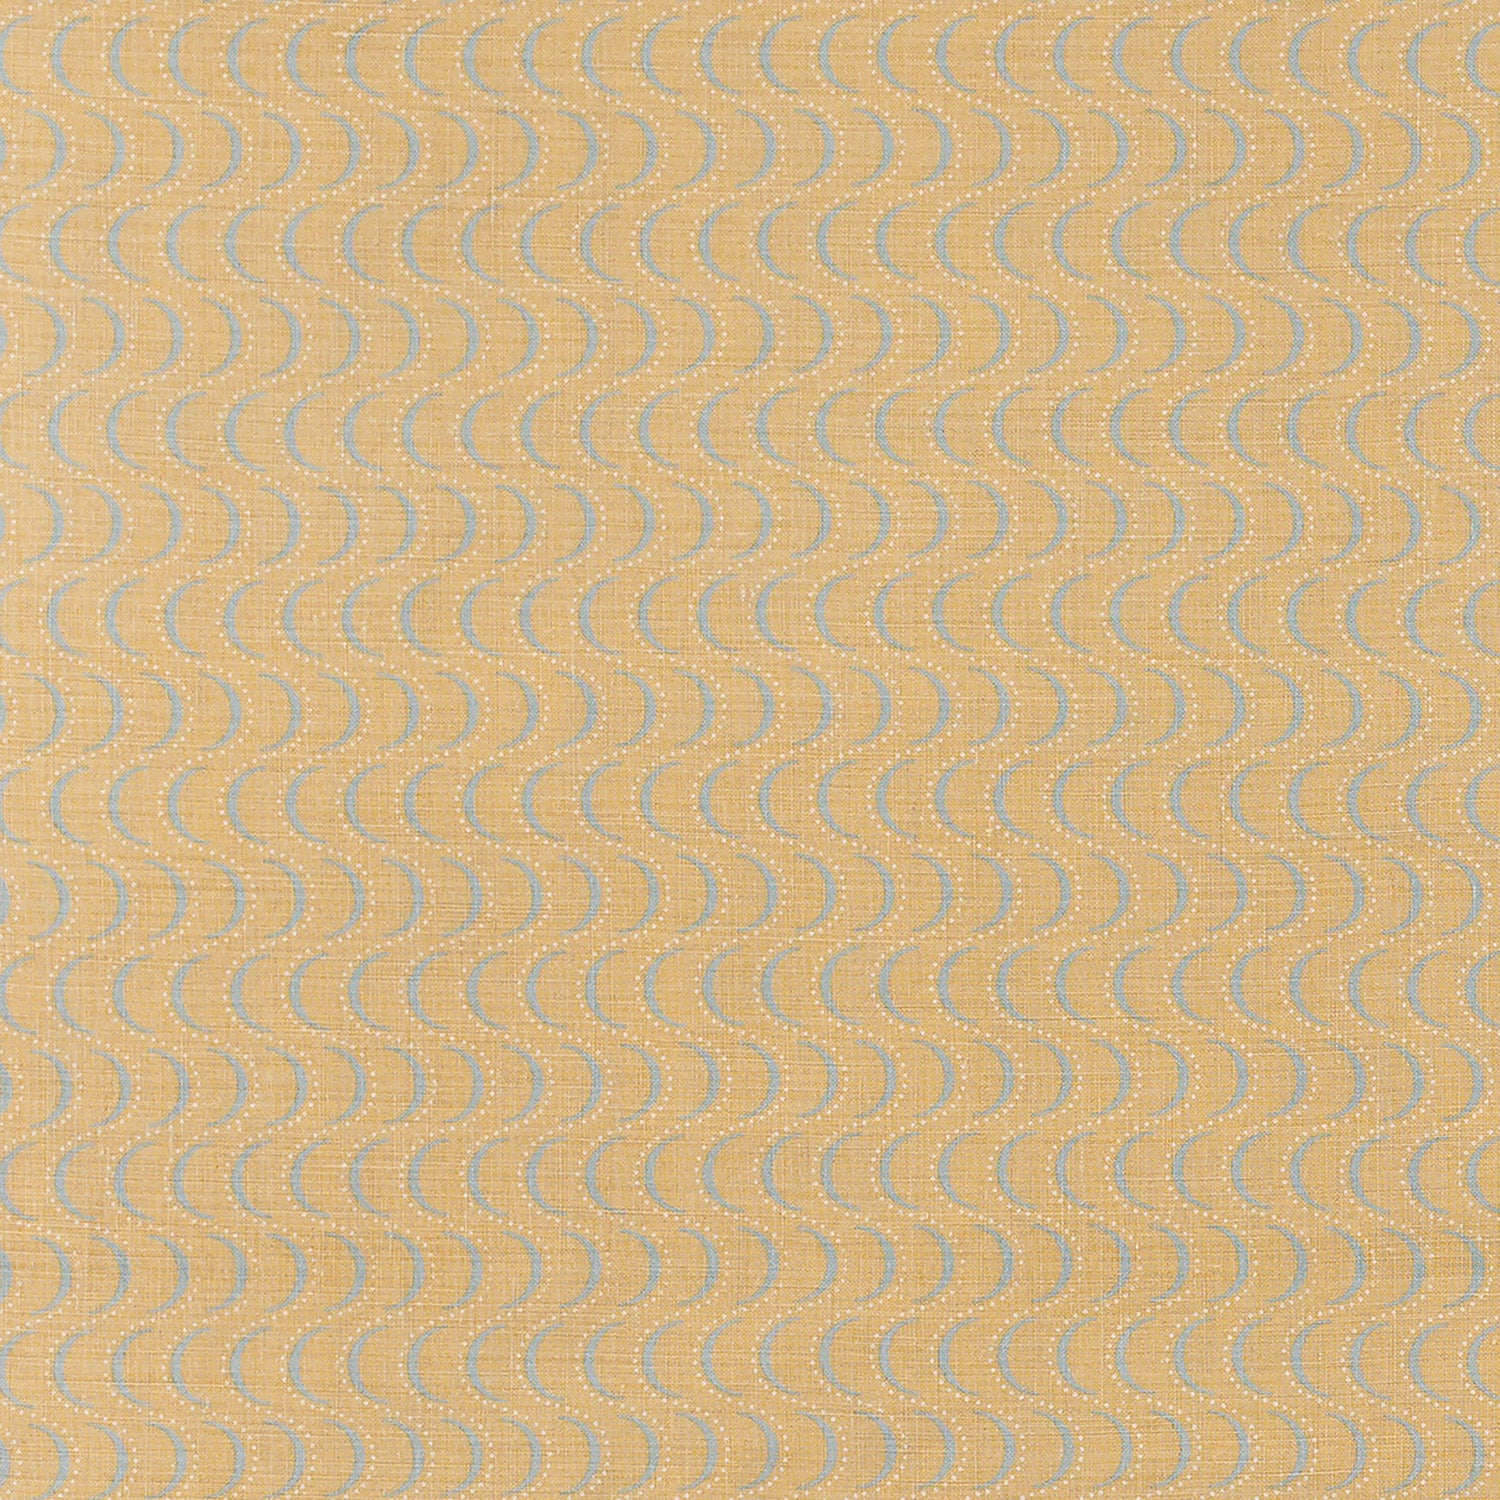 Fabric in an undulating stripe pattern in light blue and white on a mustard field.